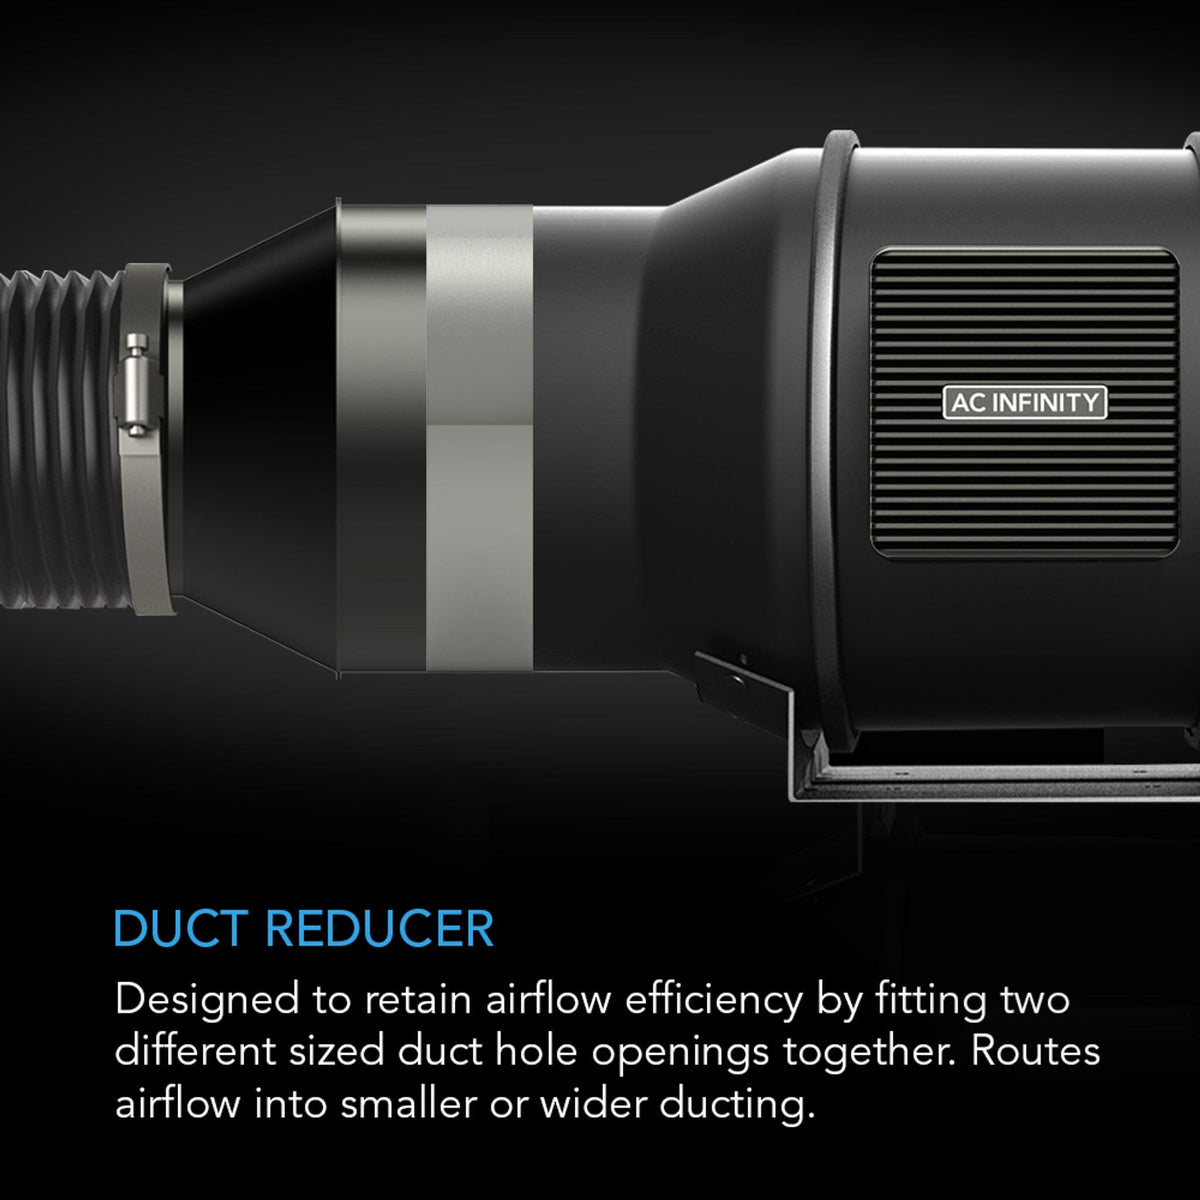 Duct reducer